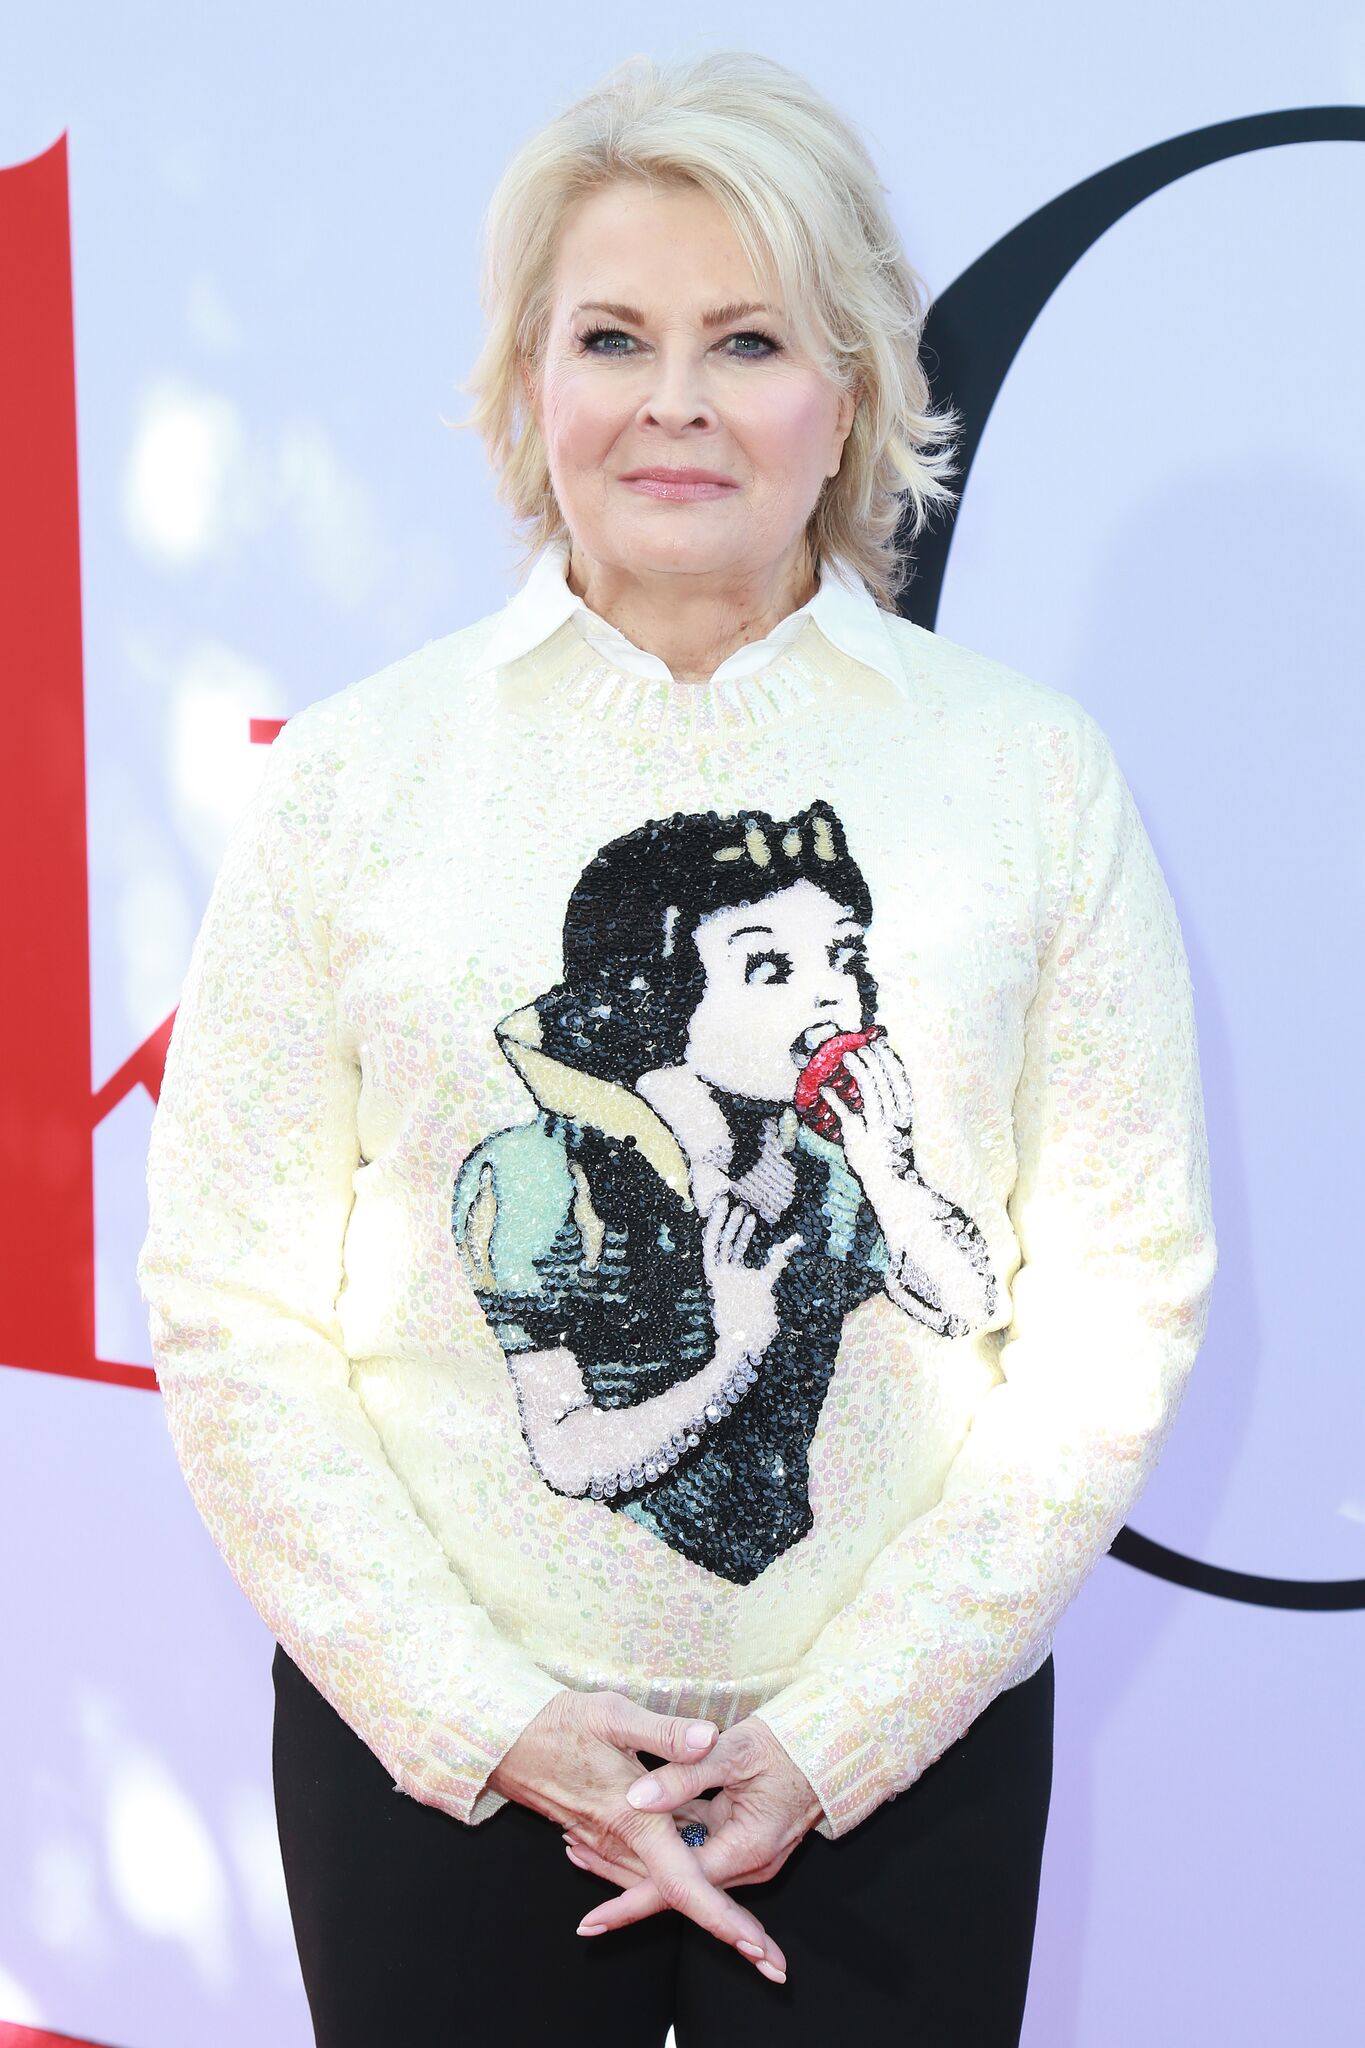 Actress Candice Bergen attends Paramount Pictures' Premiere Of "Book Club" | Getty Images